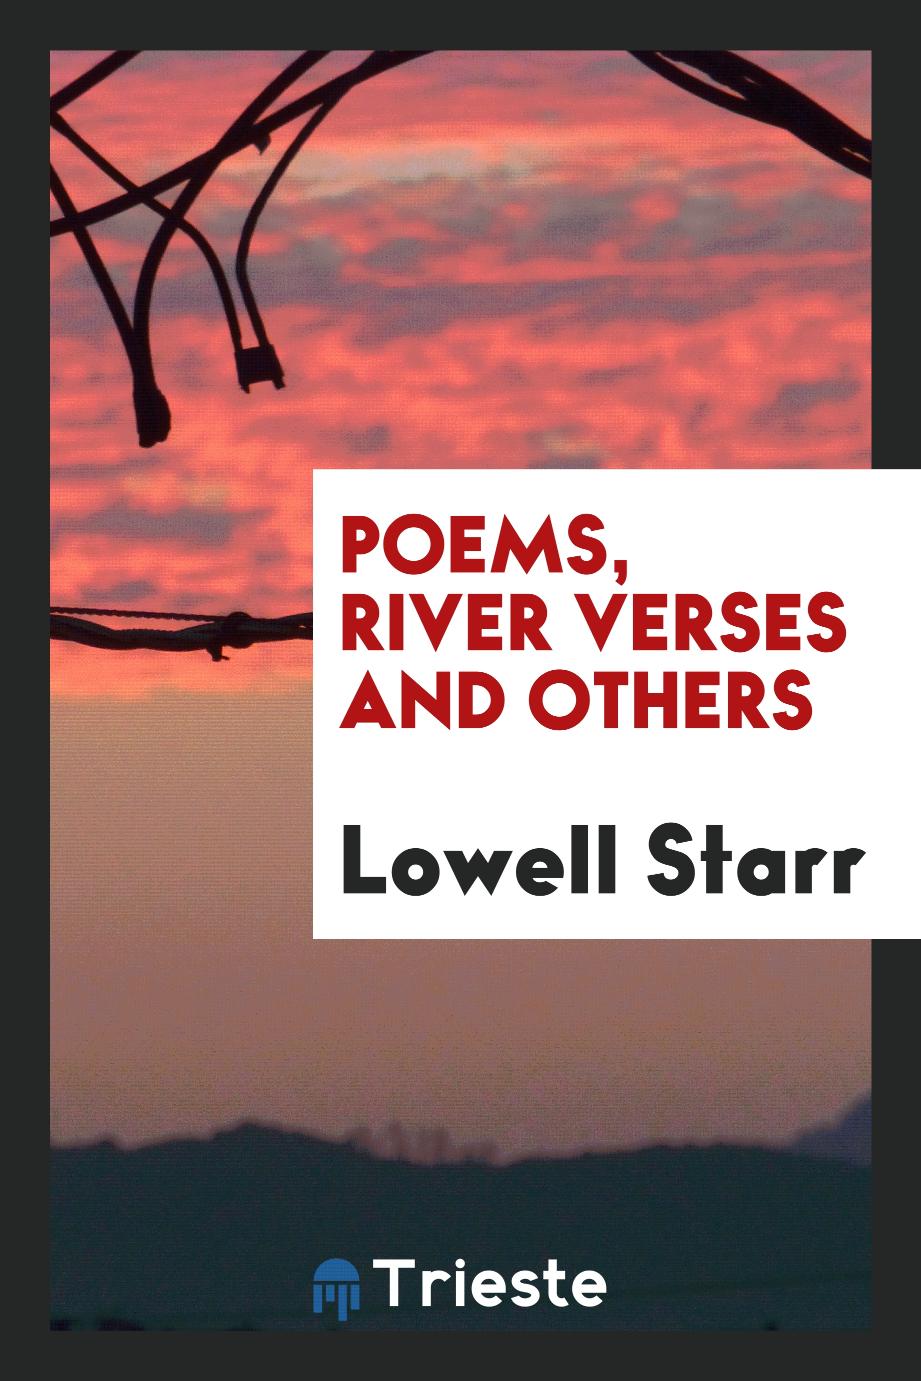 Poems, river verses and others